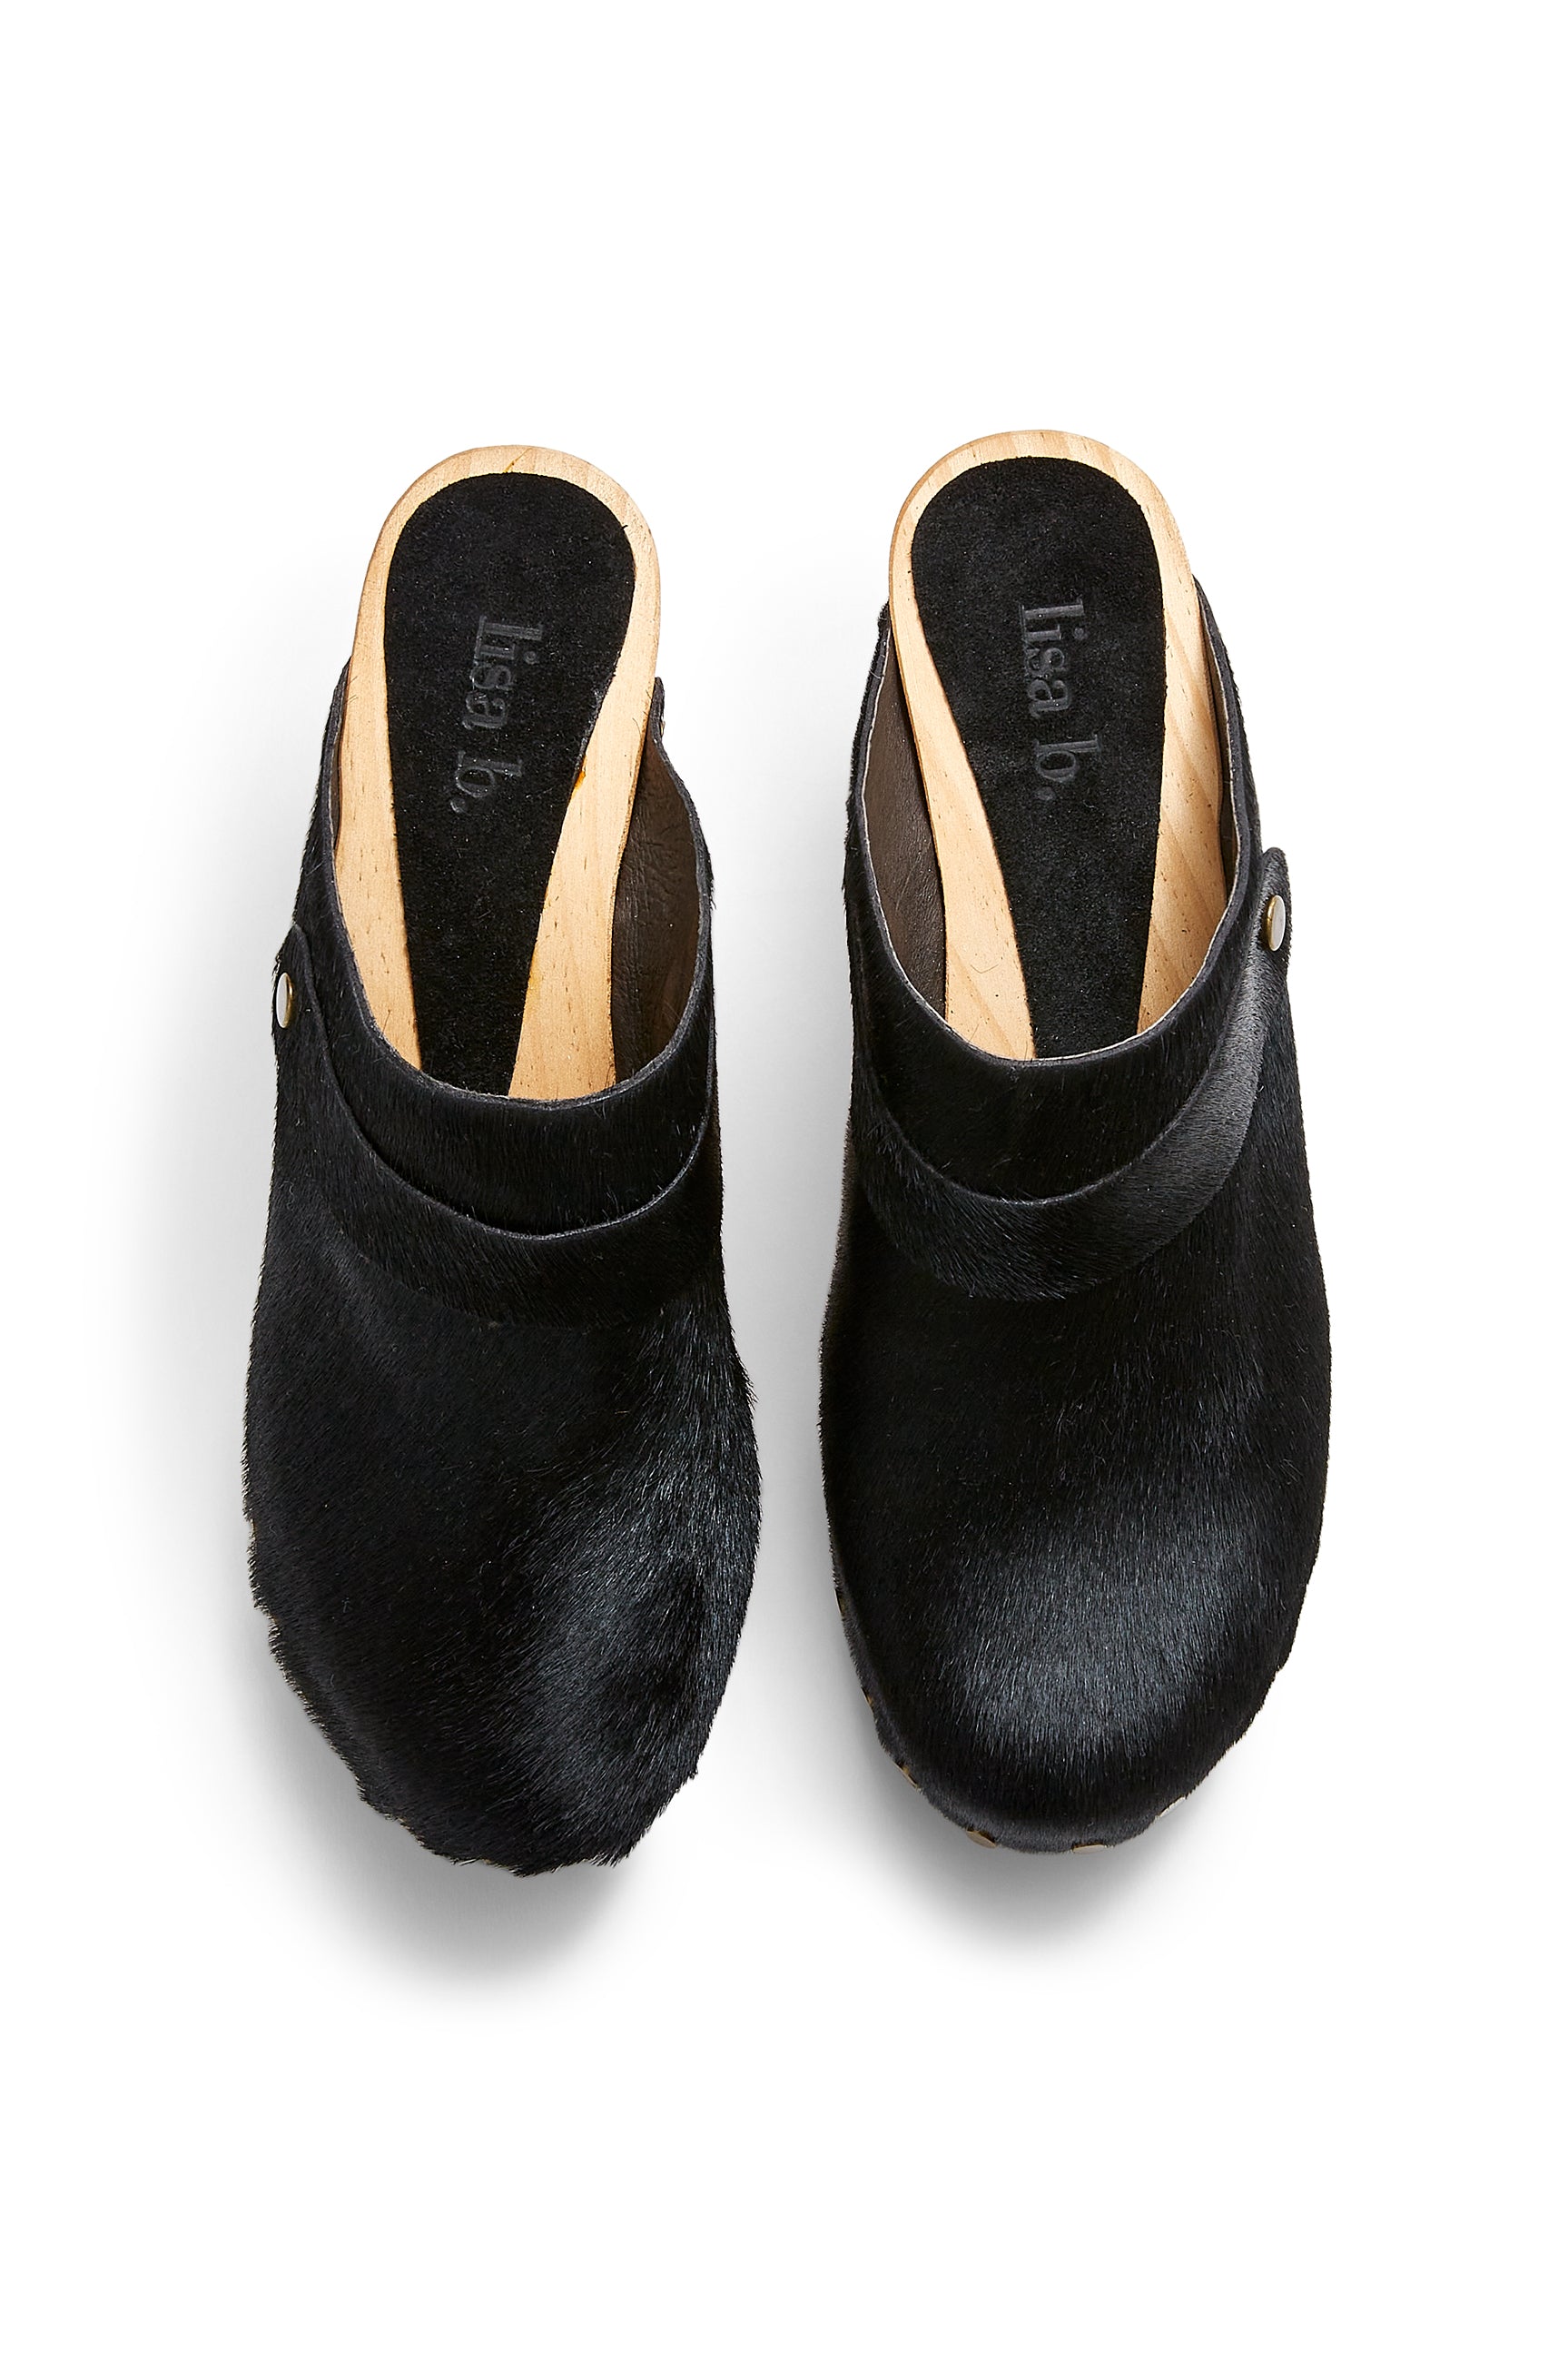 high heel classic clogs in black cow hair - ships end of April Clogs lisa b. 